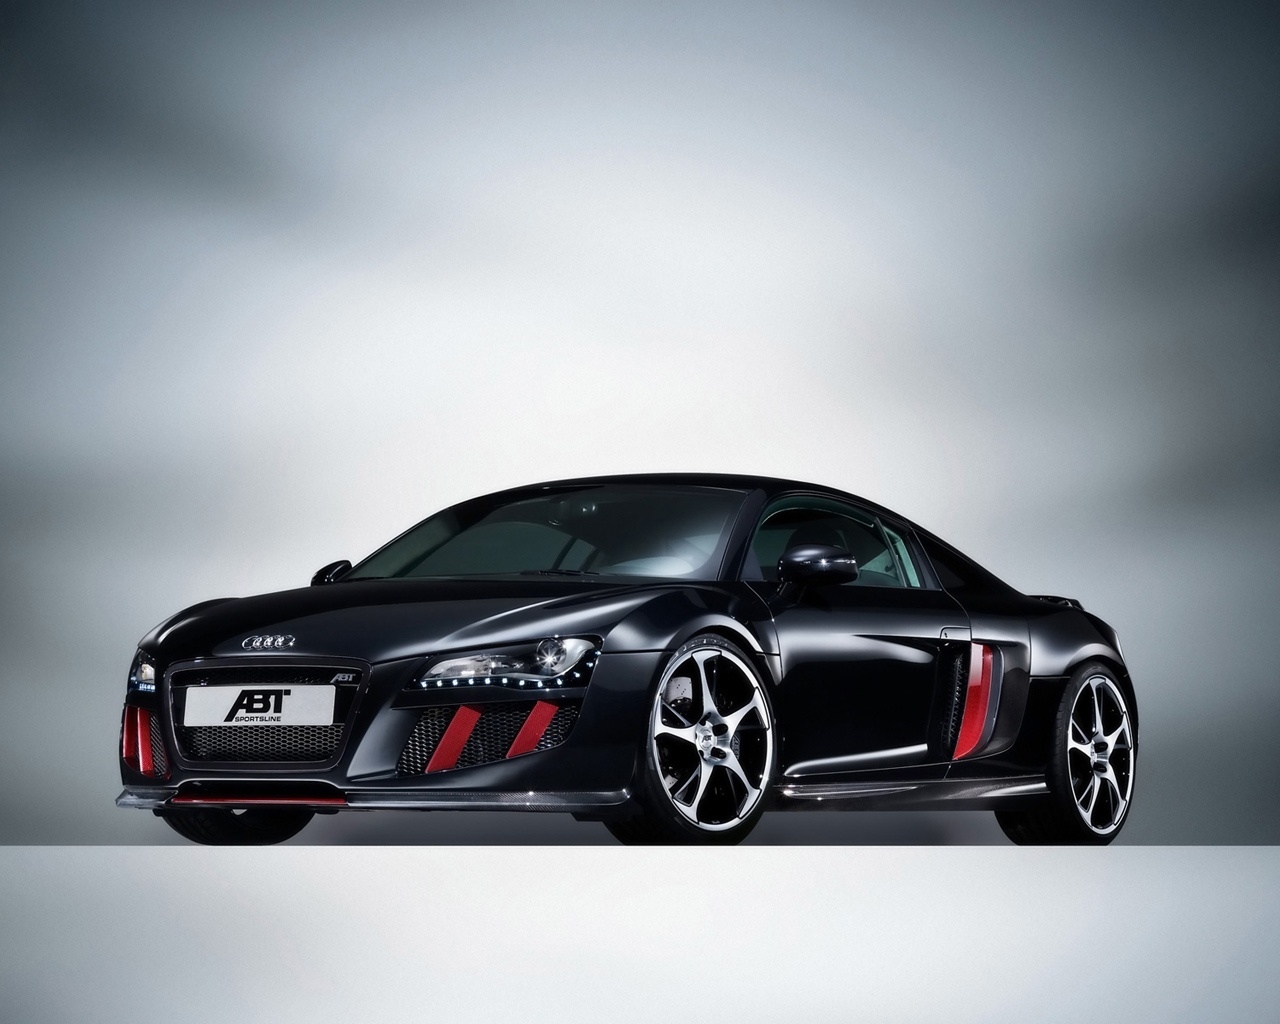 2008 Abt Audi R8 - Front Angle Lights for 1280 x 1024 resolution